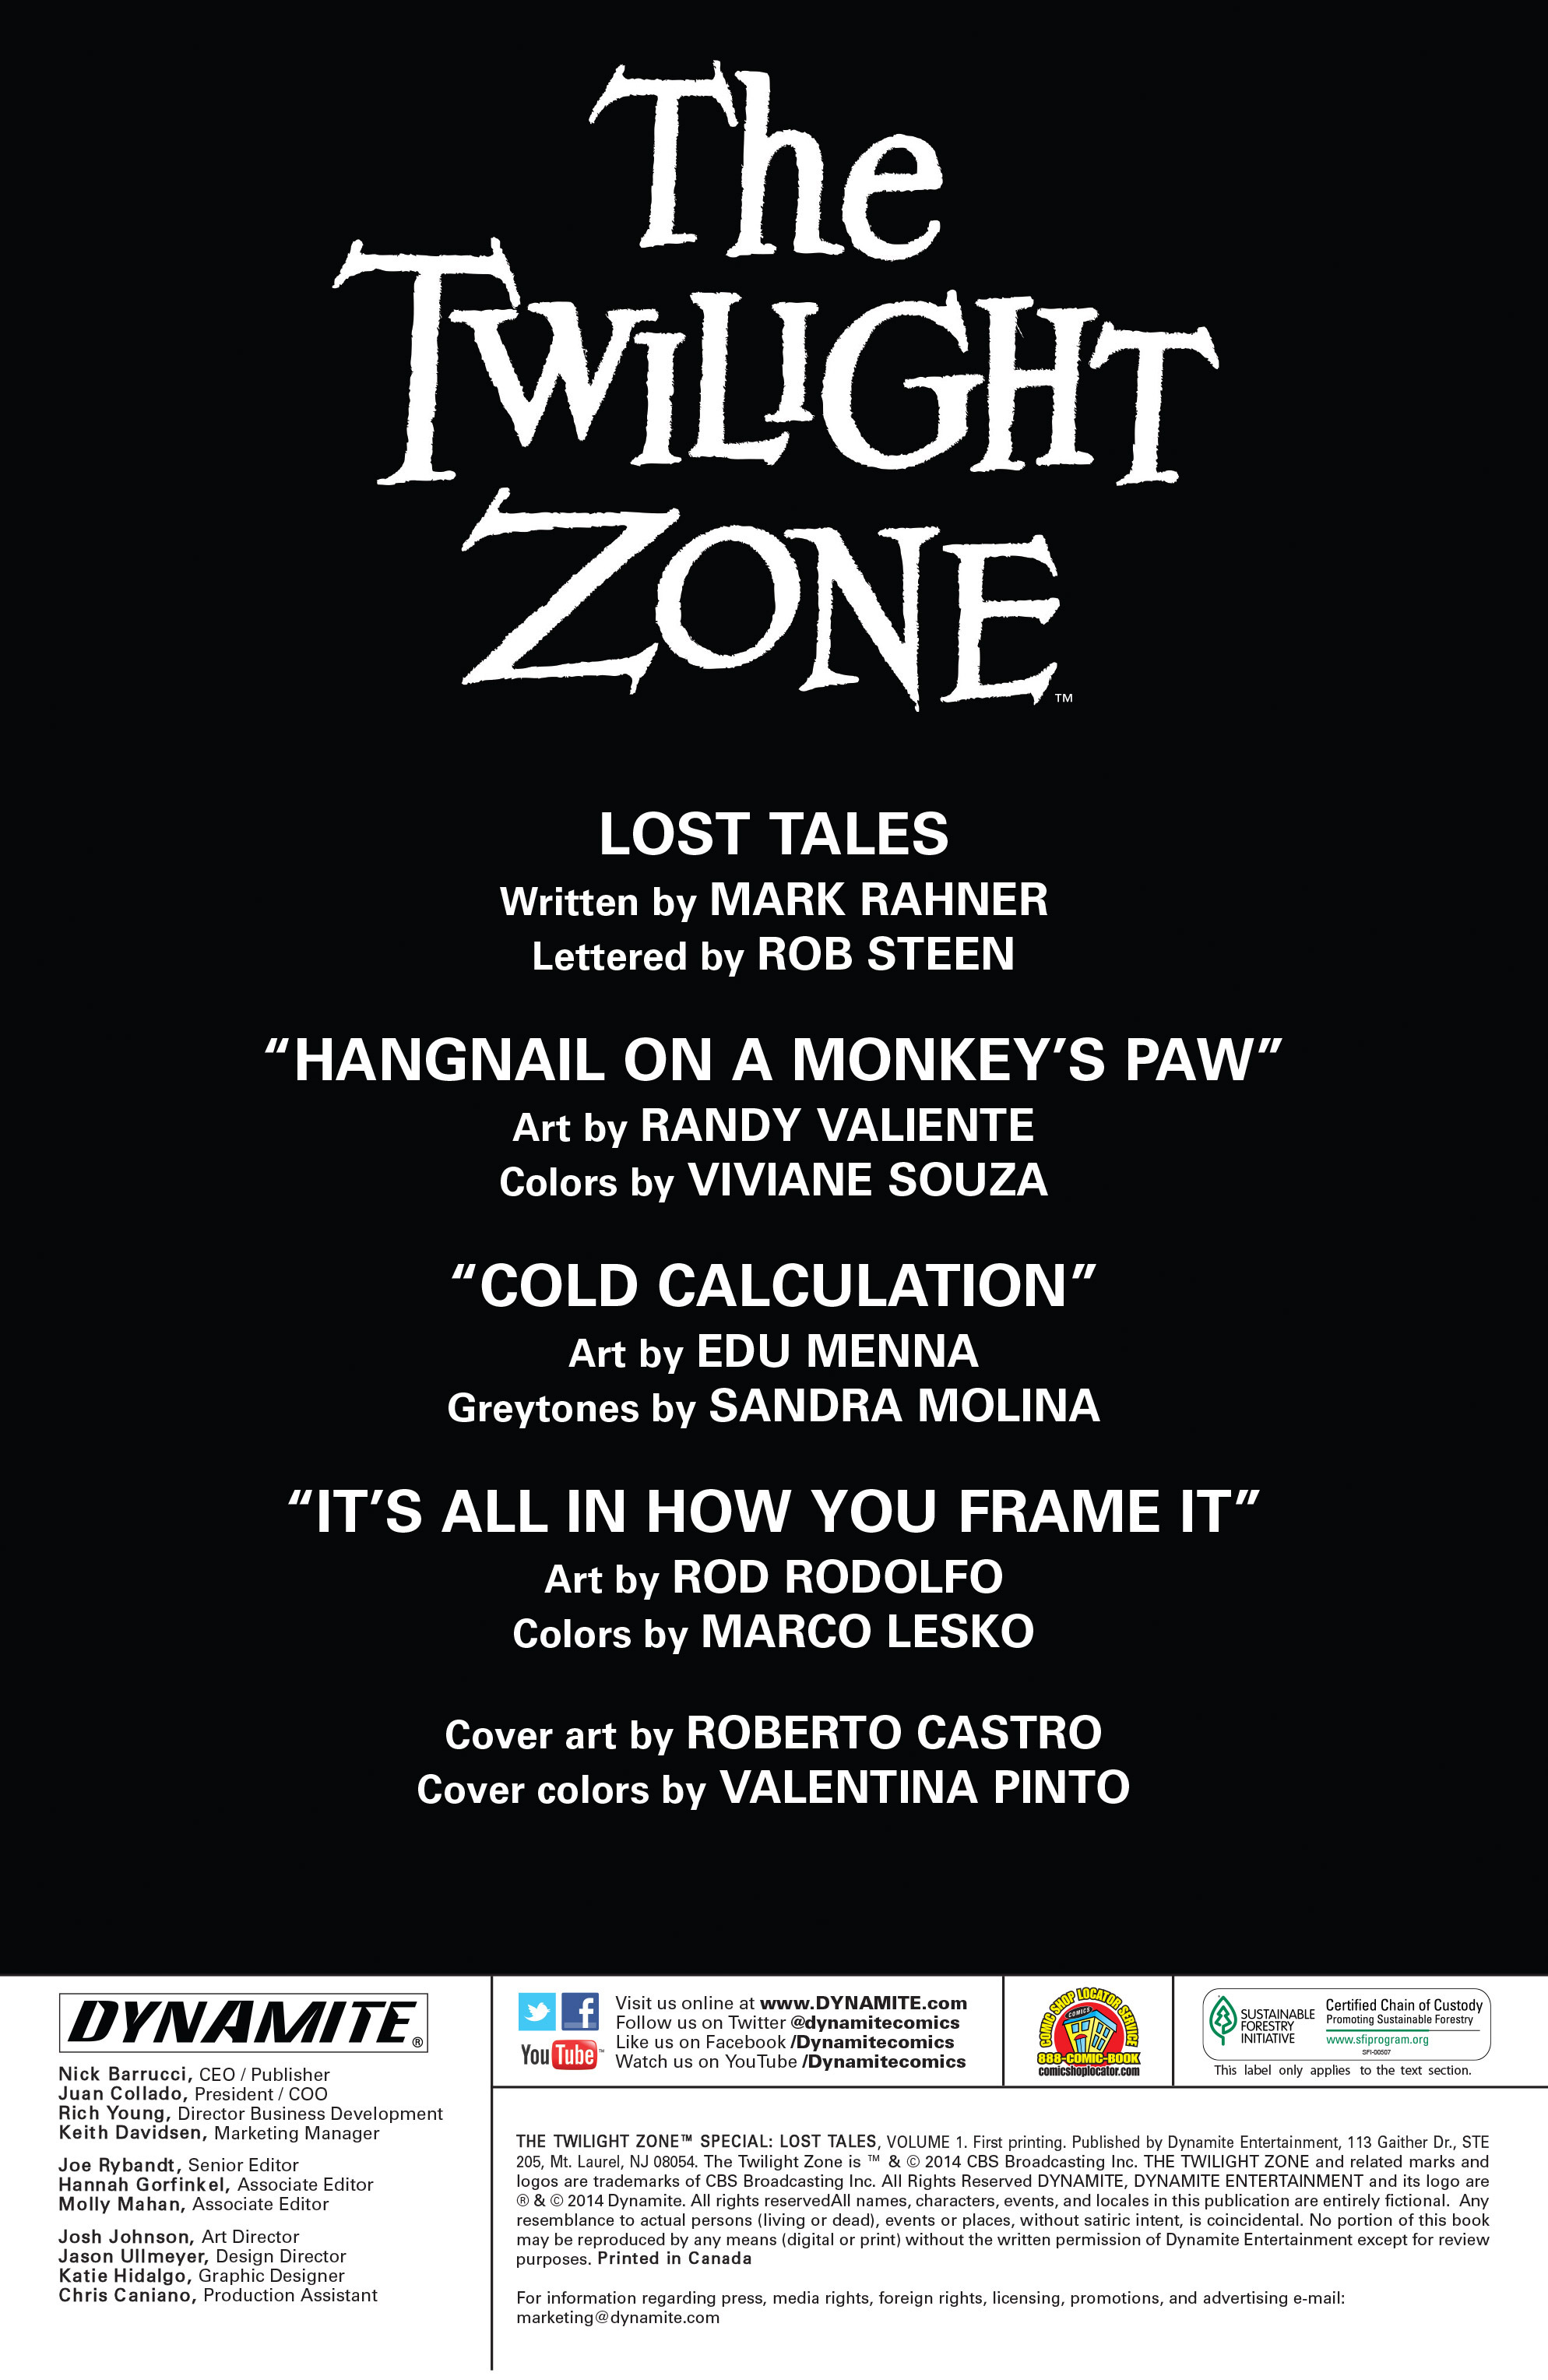 Read online The Twilight Zone Special: Lost Tales comic -  Issue # Full - 2